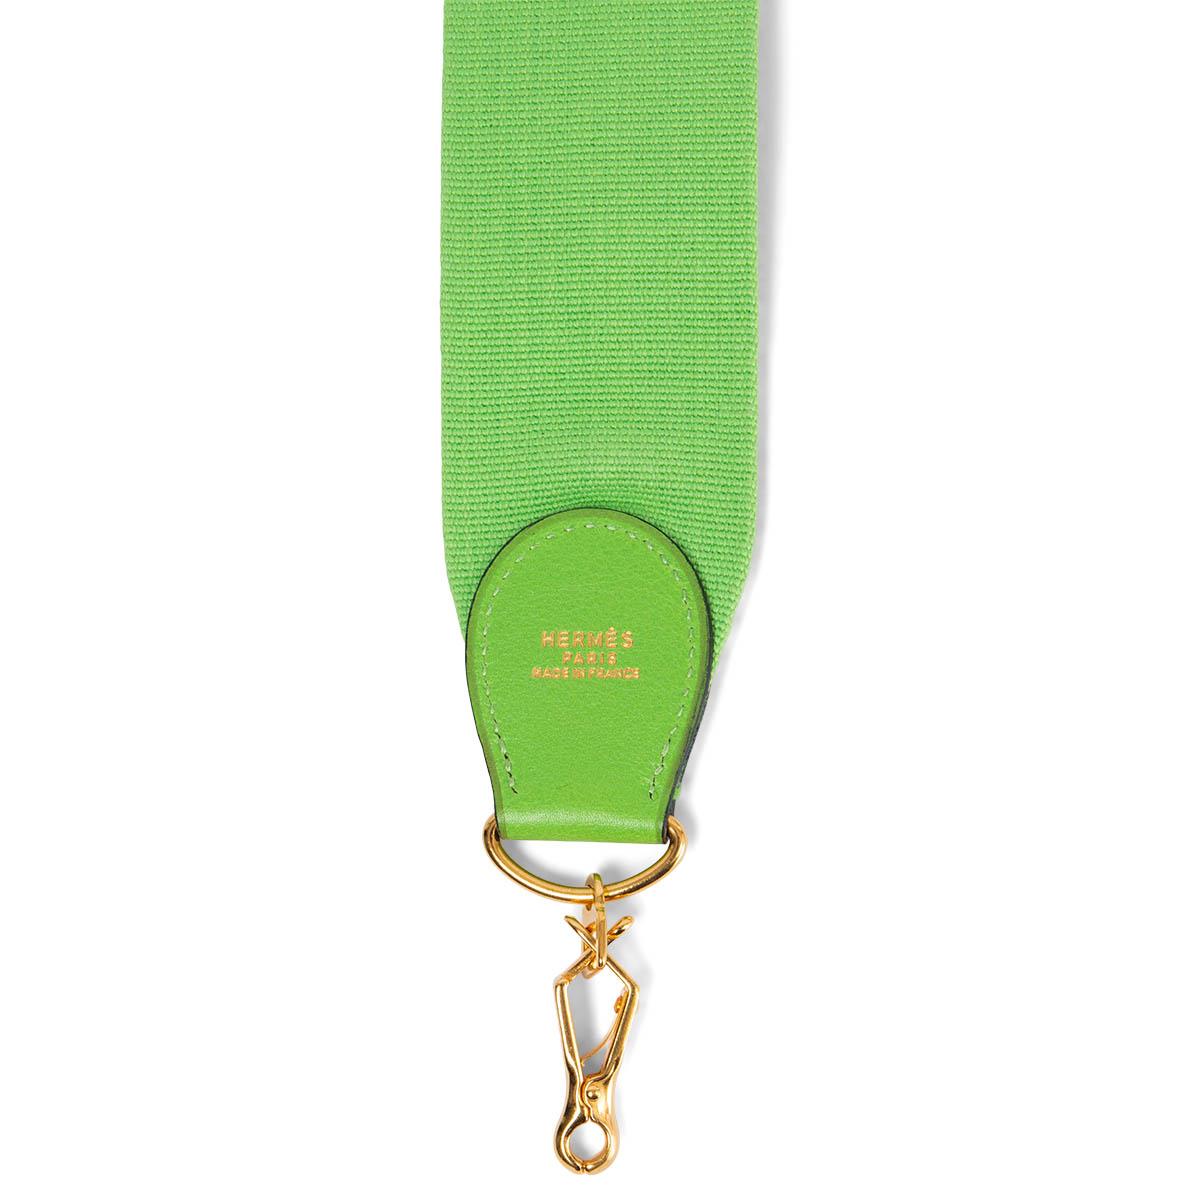 100% authentic Hermès shoulder strap for your Kelly or Evelyne bag in Vert Cru canvas and Gulliver leather. Has been carried and is in excellent condition.

Measurements
Width	5cm (2in)
Length	110cm (42.9in)
Hardware	Gold-Tone

All our listings